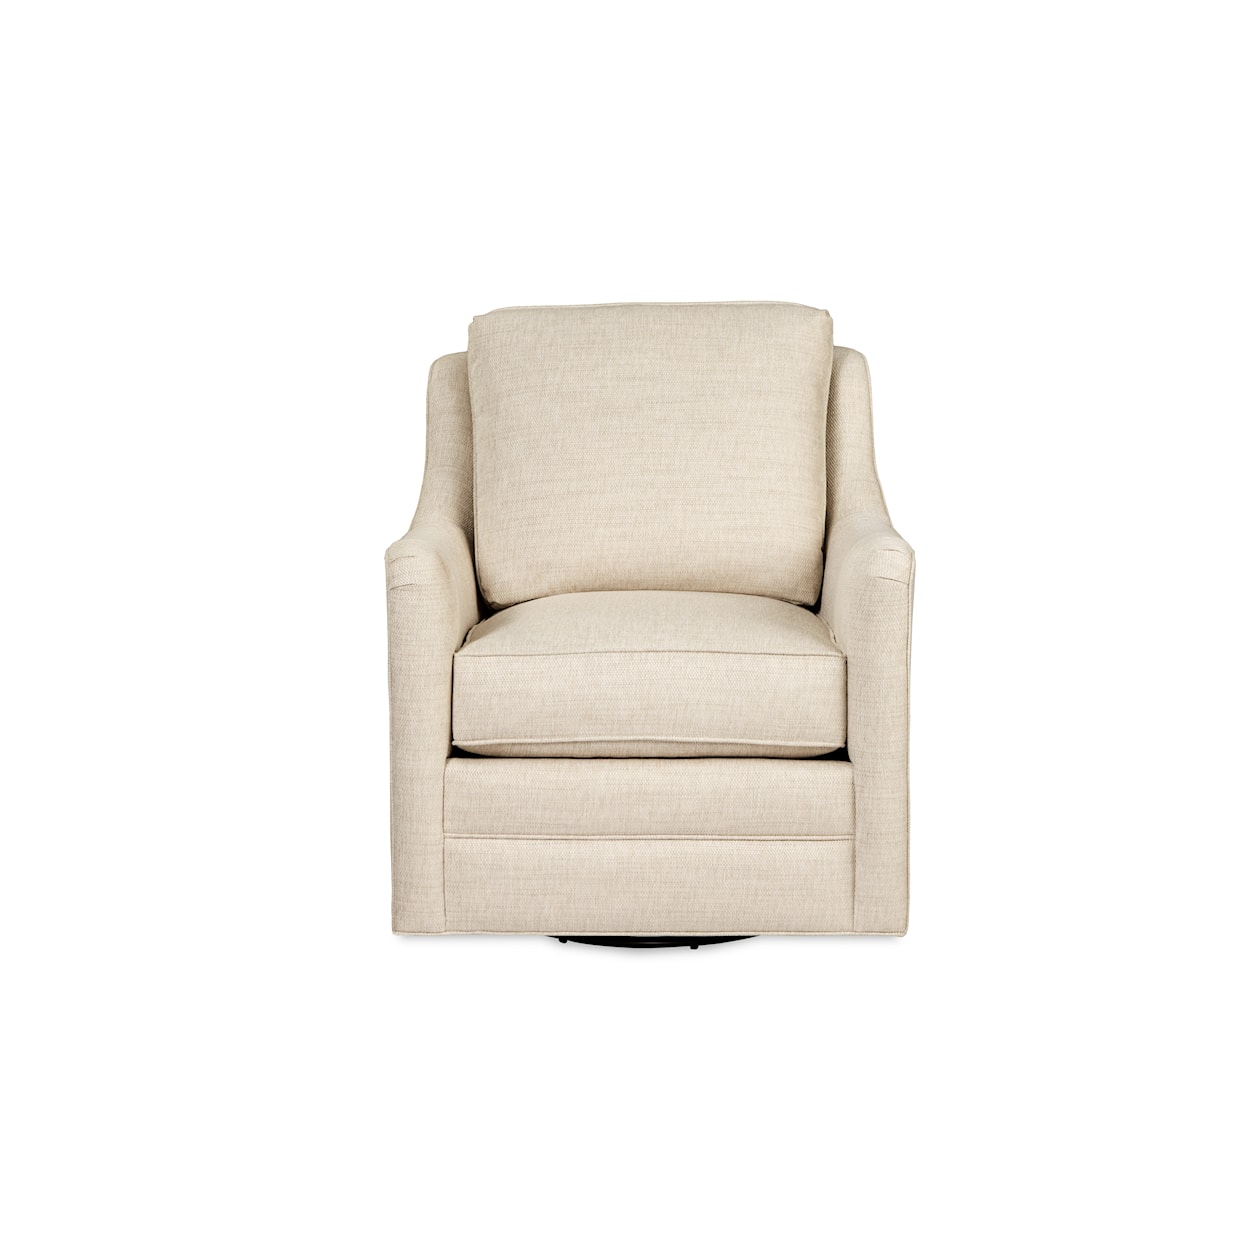 Hickory Craft 016210 Swivel Chair